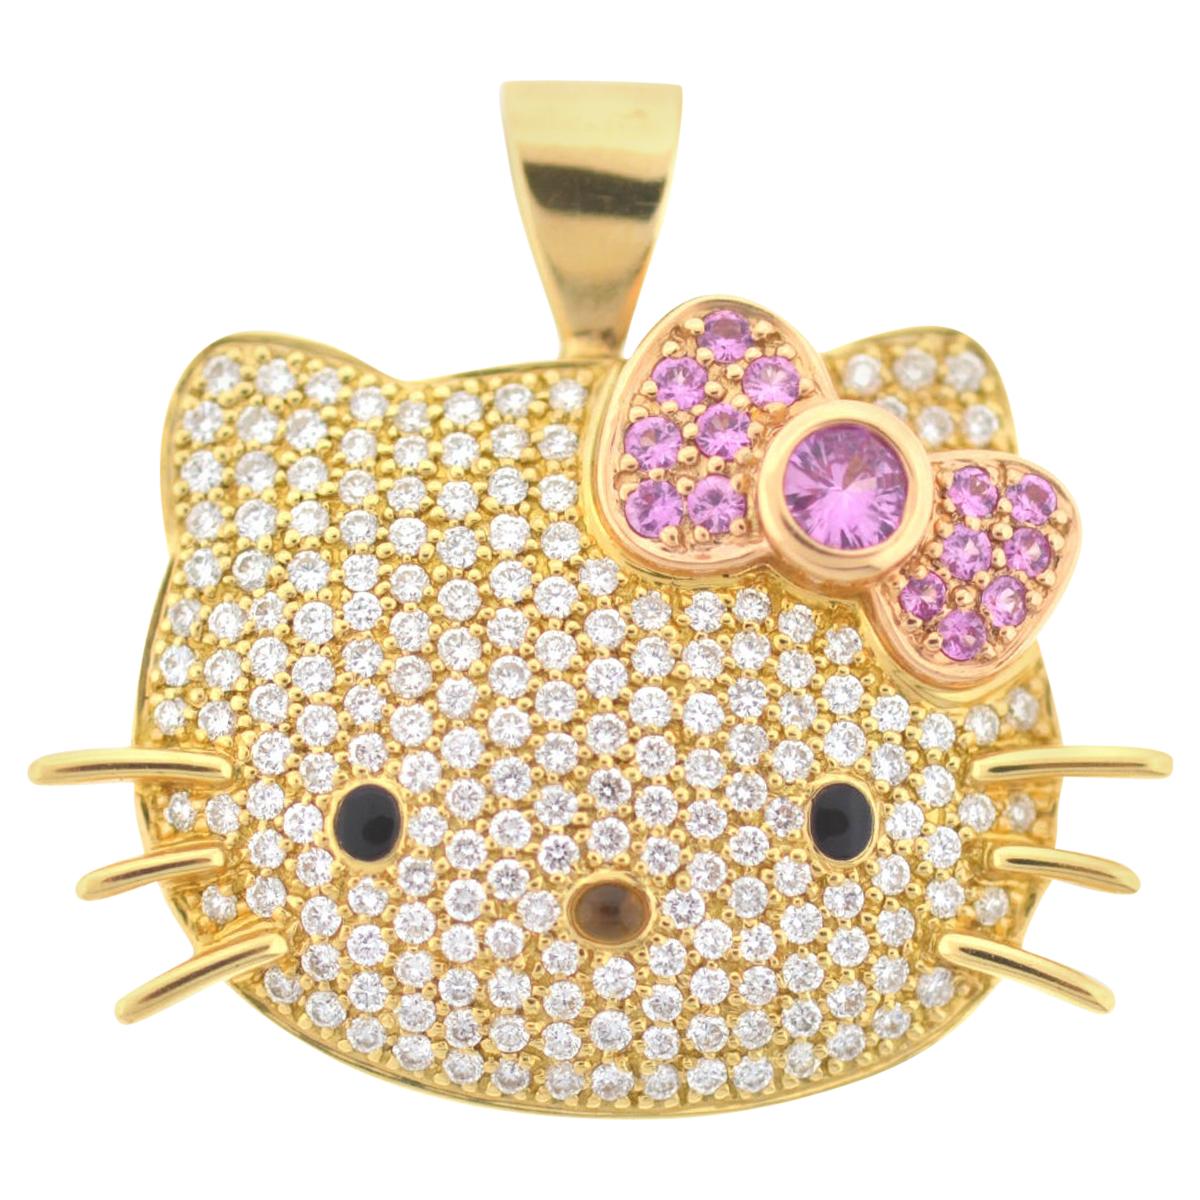 Bronze Hello Kitty Pendant Sanrio Connector Bead Jewelry Hairbow Gold Vintage NR 